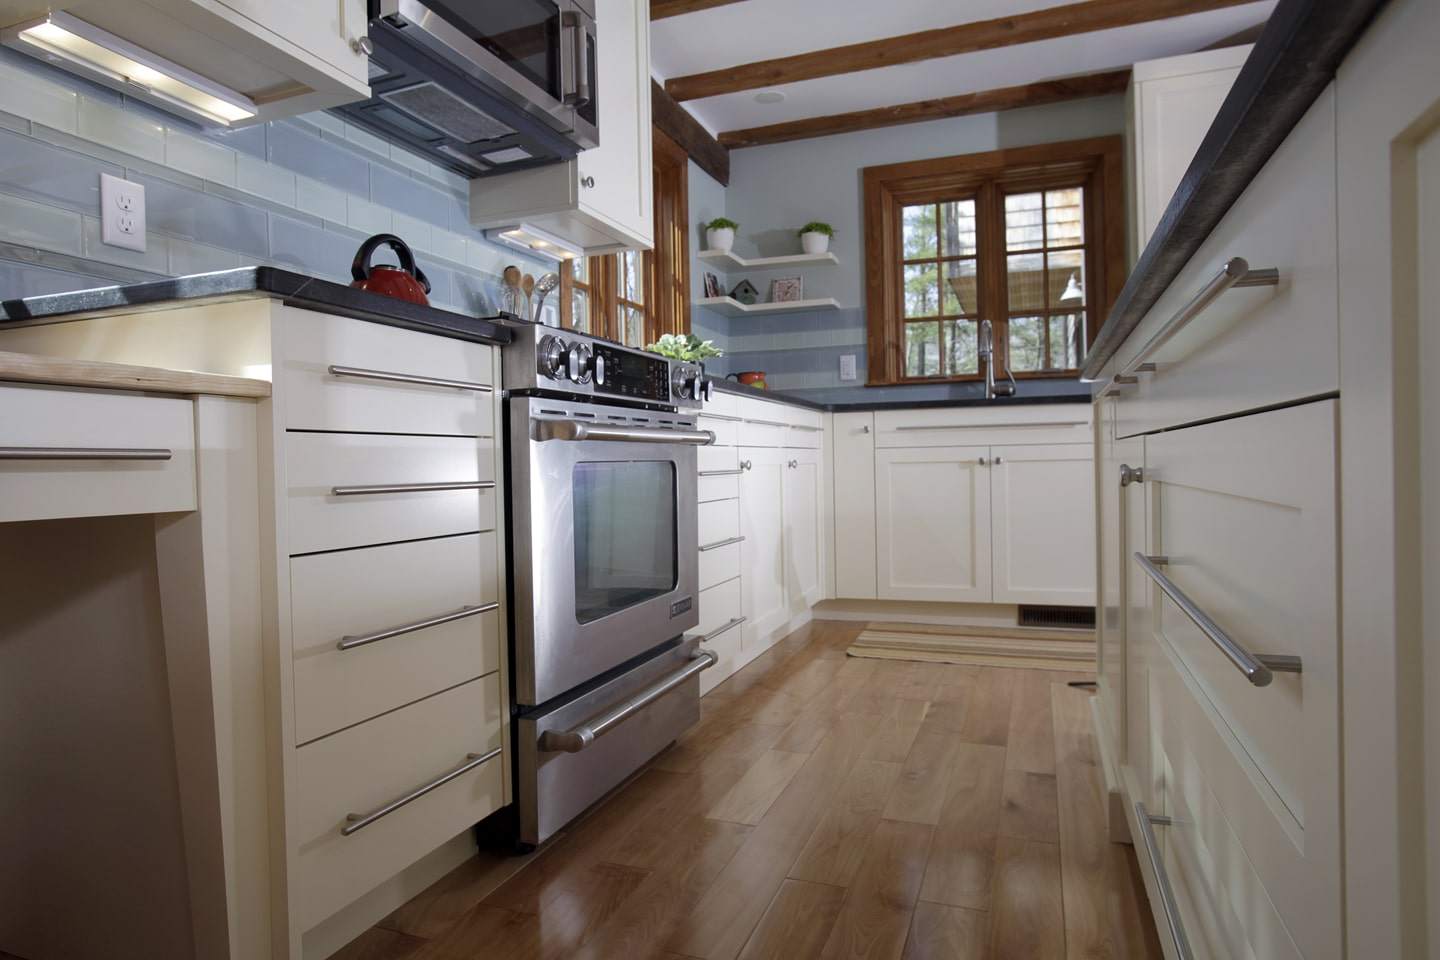 Flat and Recessed Kitchen Cabinetry. Wood Flooring. Stainless Steel Oven, and Microwave Featured 